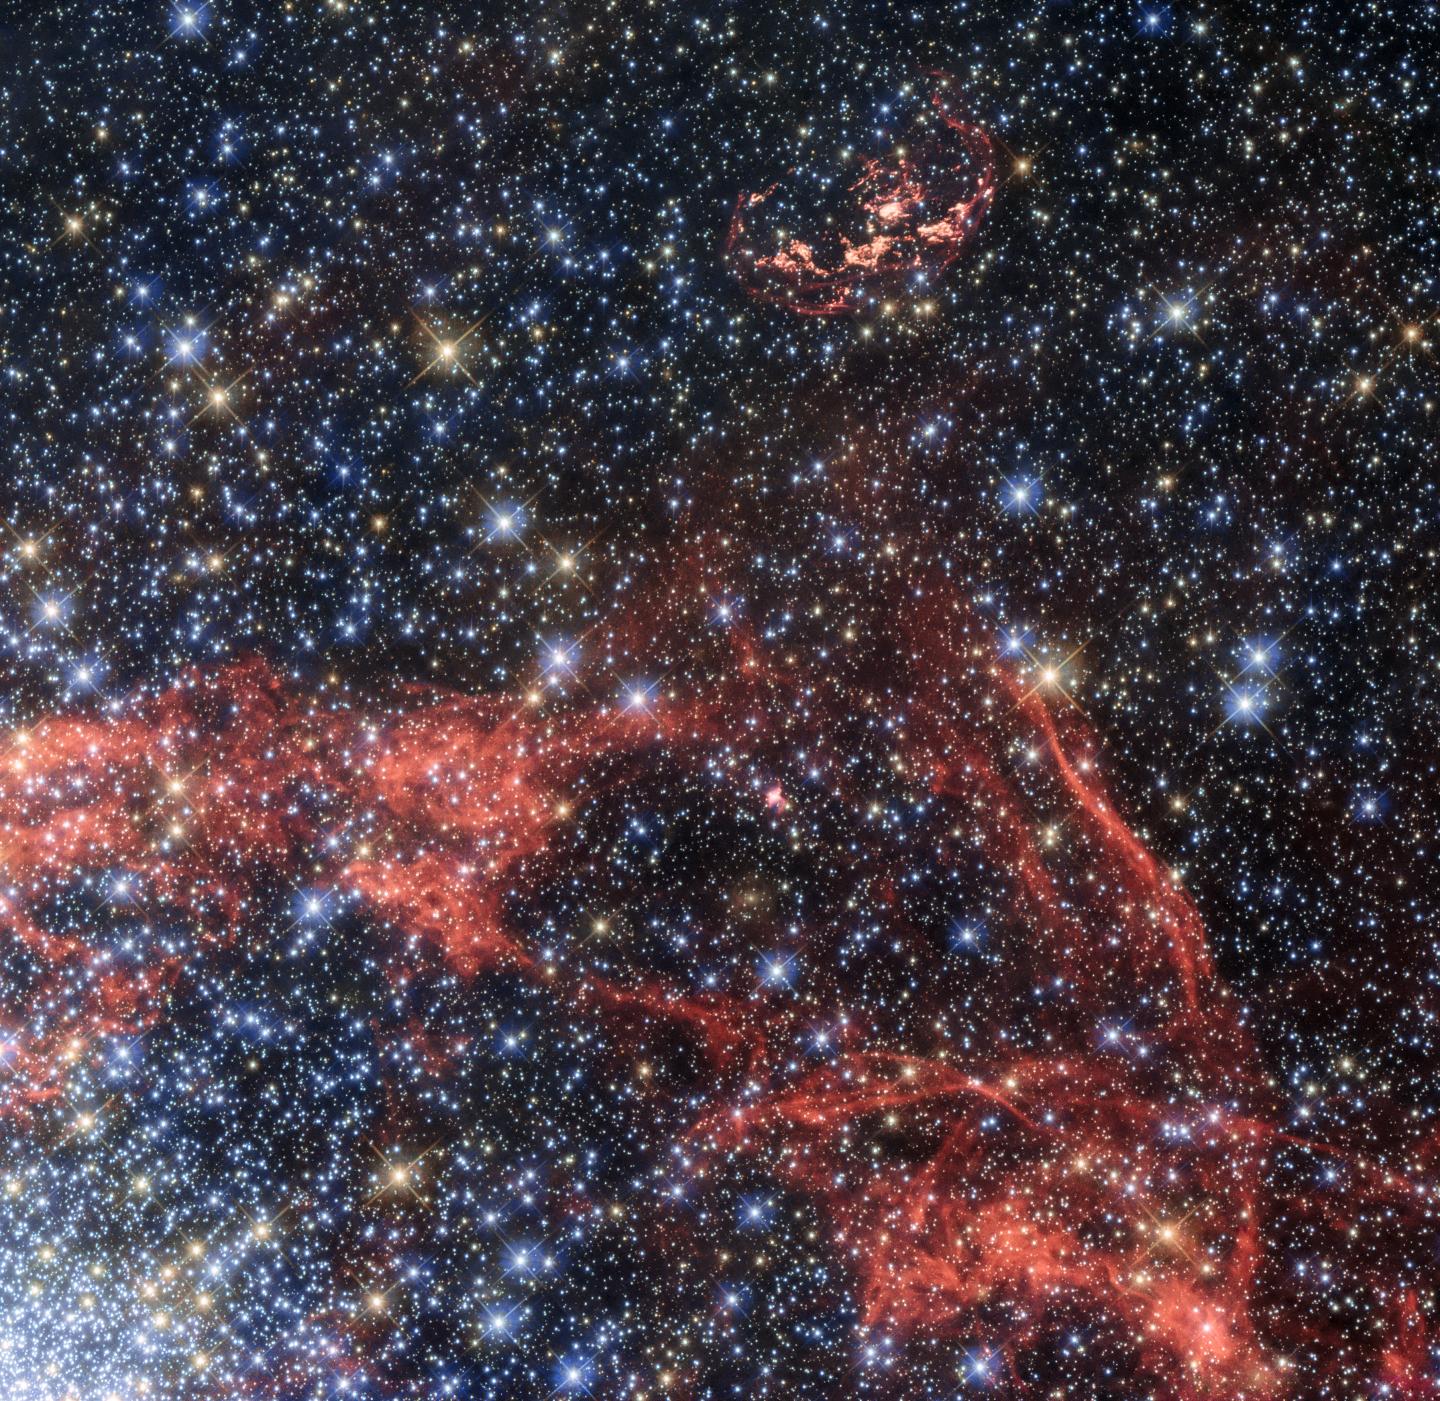 Hubble View of Supernova Remnant SNR 0509-68.7